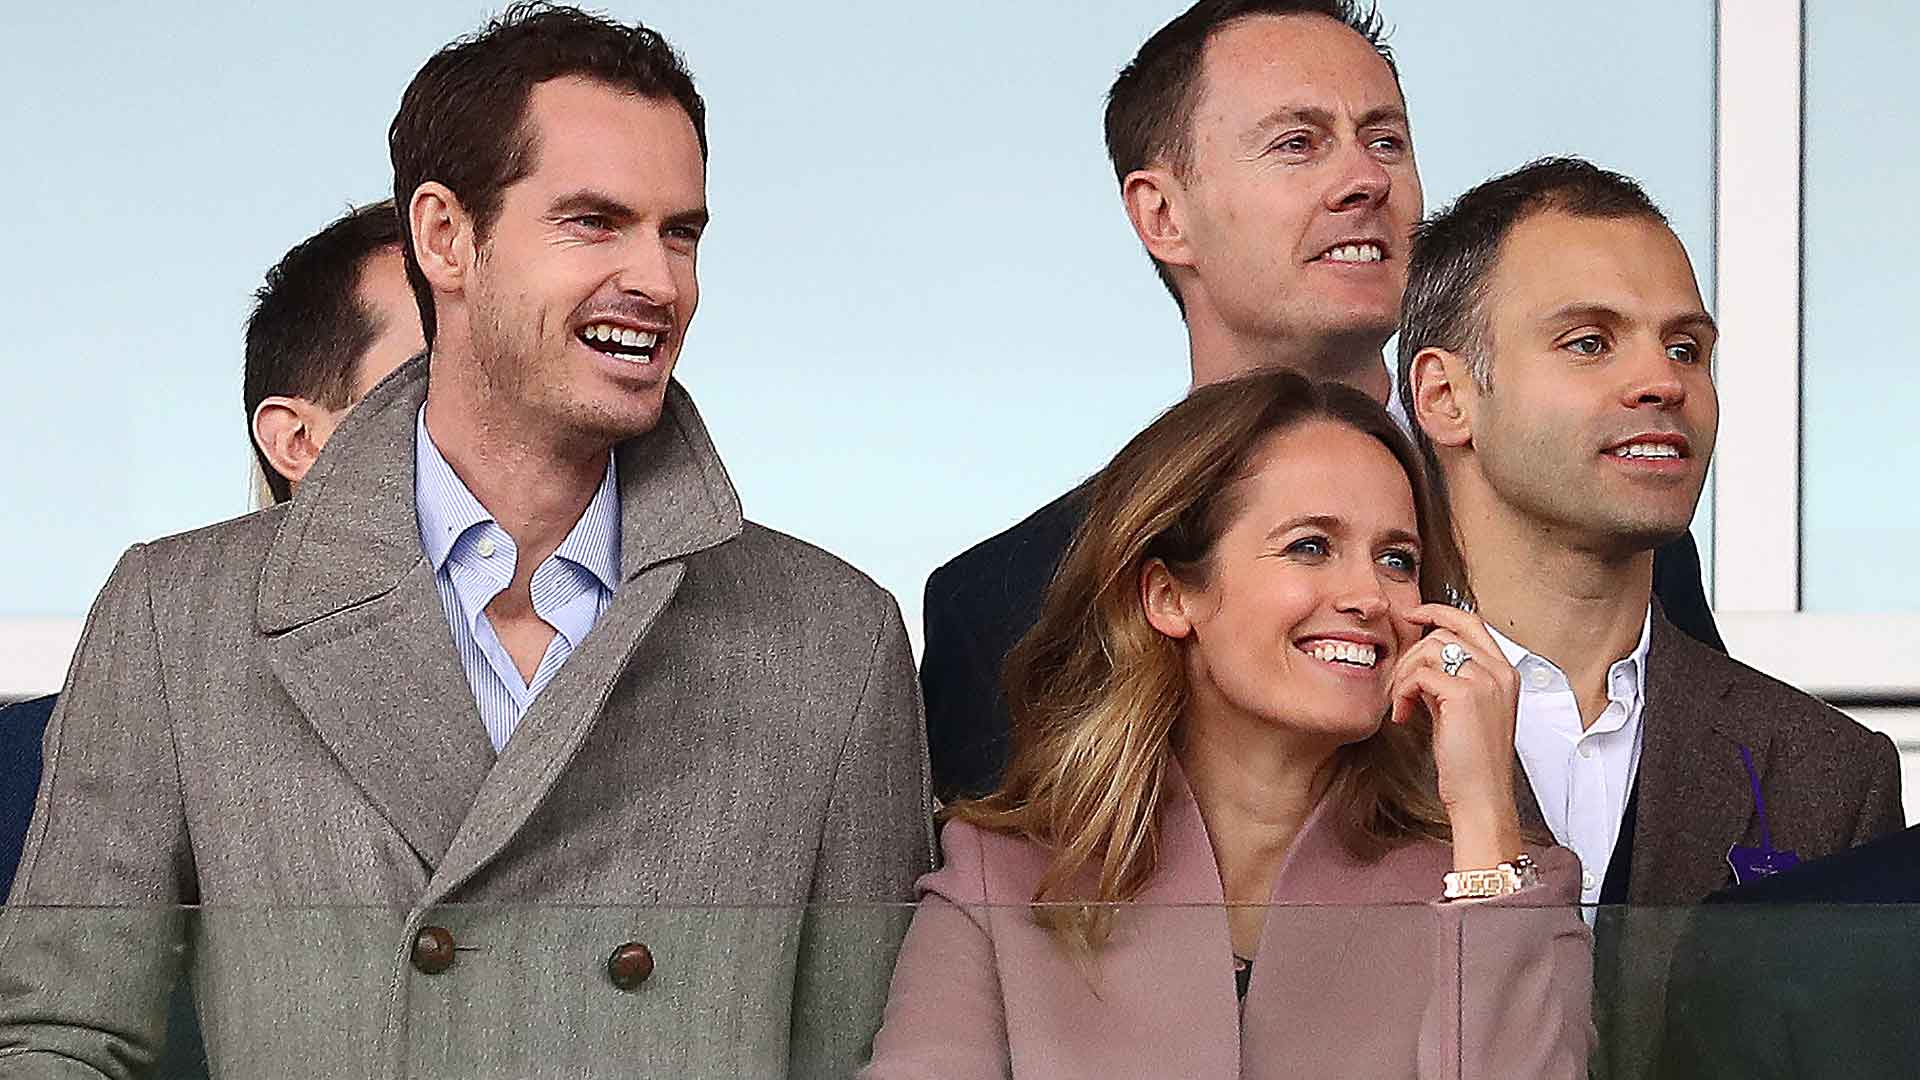 Andy Murray and his wife, Kim, watch the opening horse race on Ladies Day at the 2019 Cheltenham Festival.